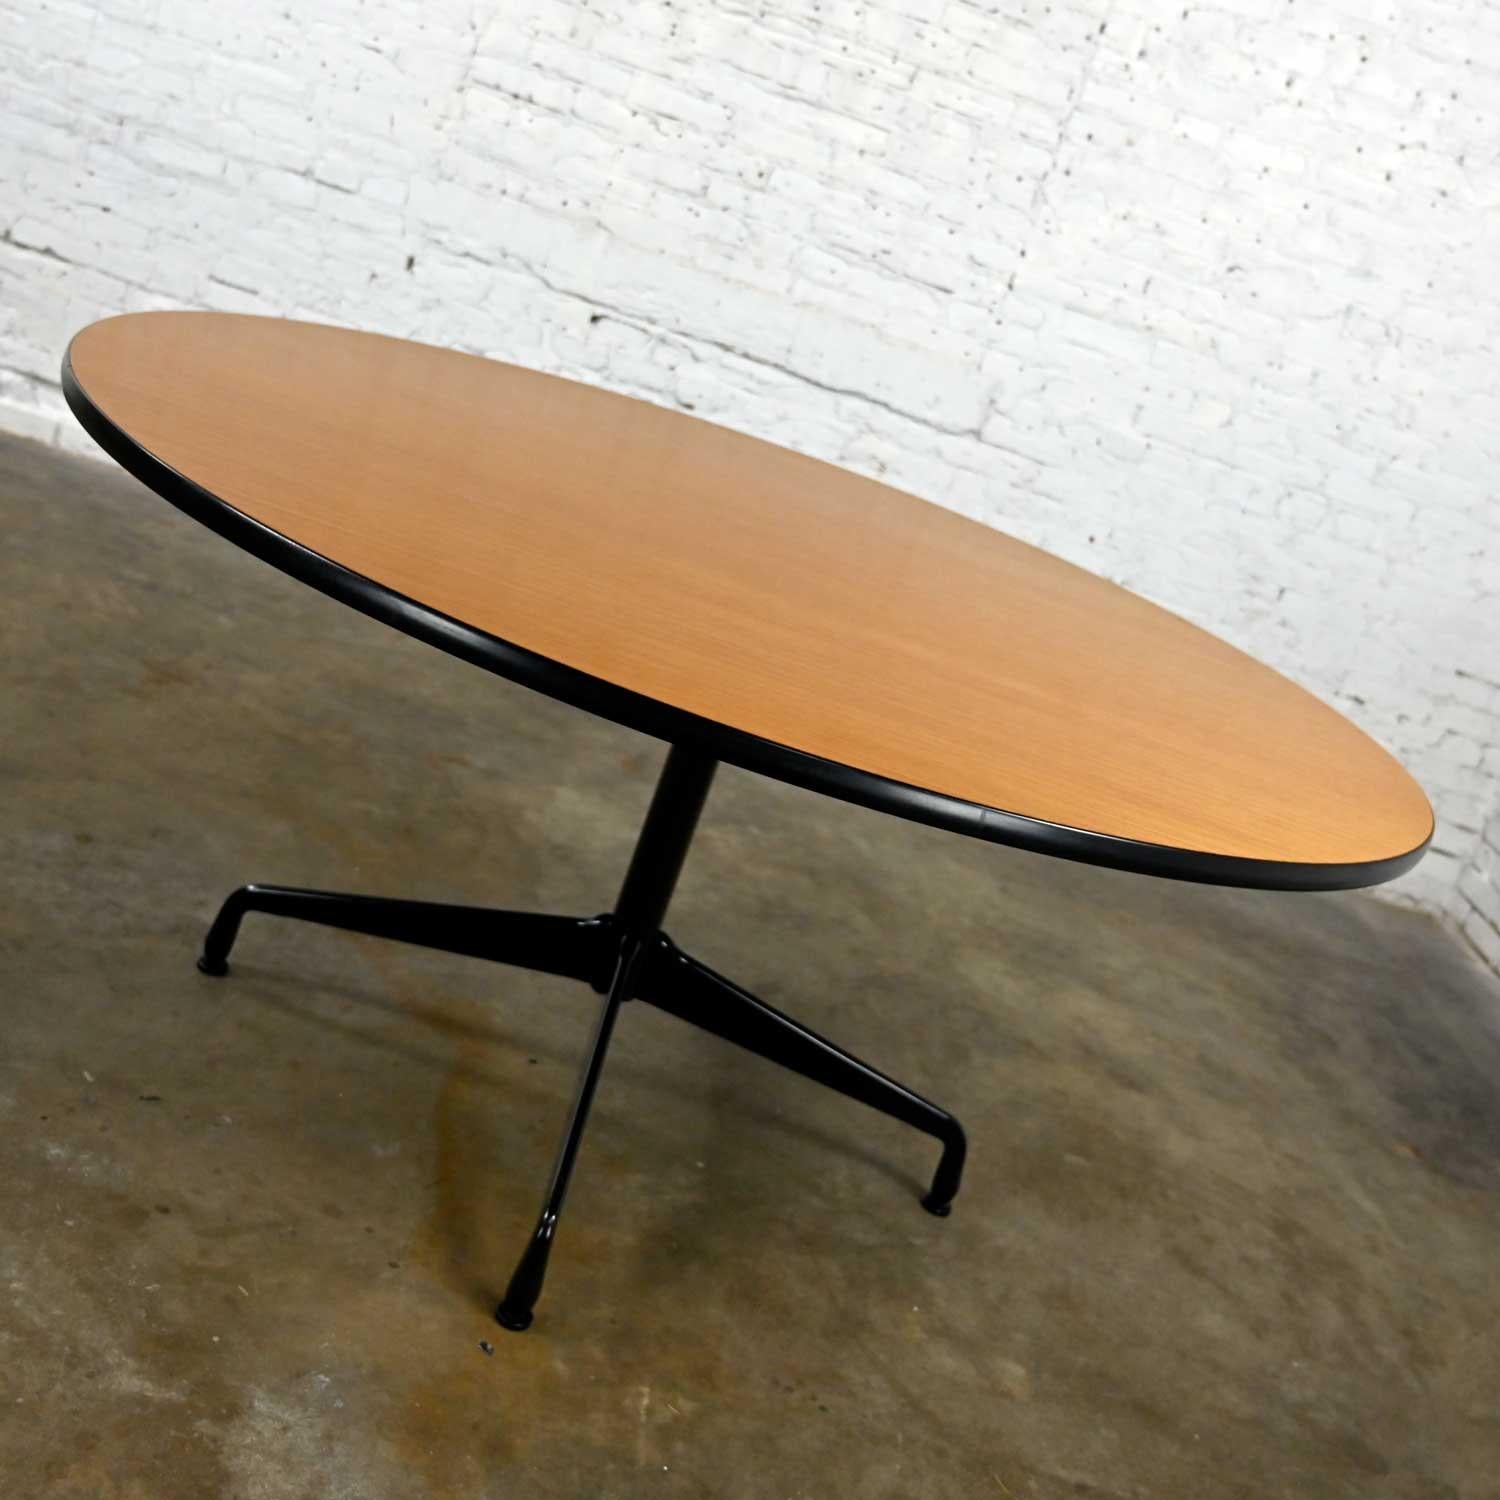 Wonderful vintage Mid-Century Modern Eames for Herman Miller 60” round tables comprised of light natural oak wood veneer tops, black universal bases, and aluminum spider attachment. There are 11 that we are selling separately. Beautiful condition,